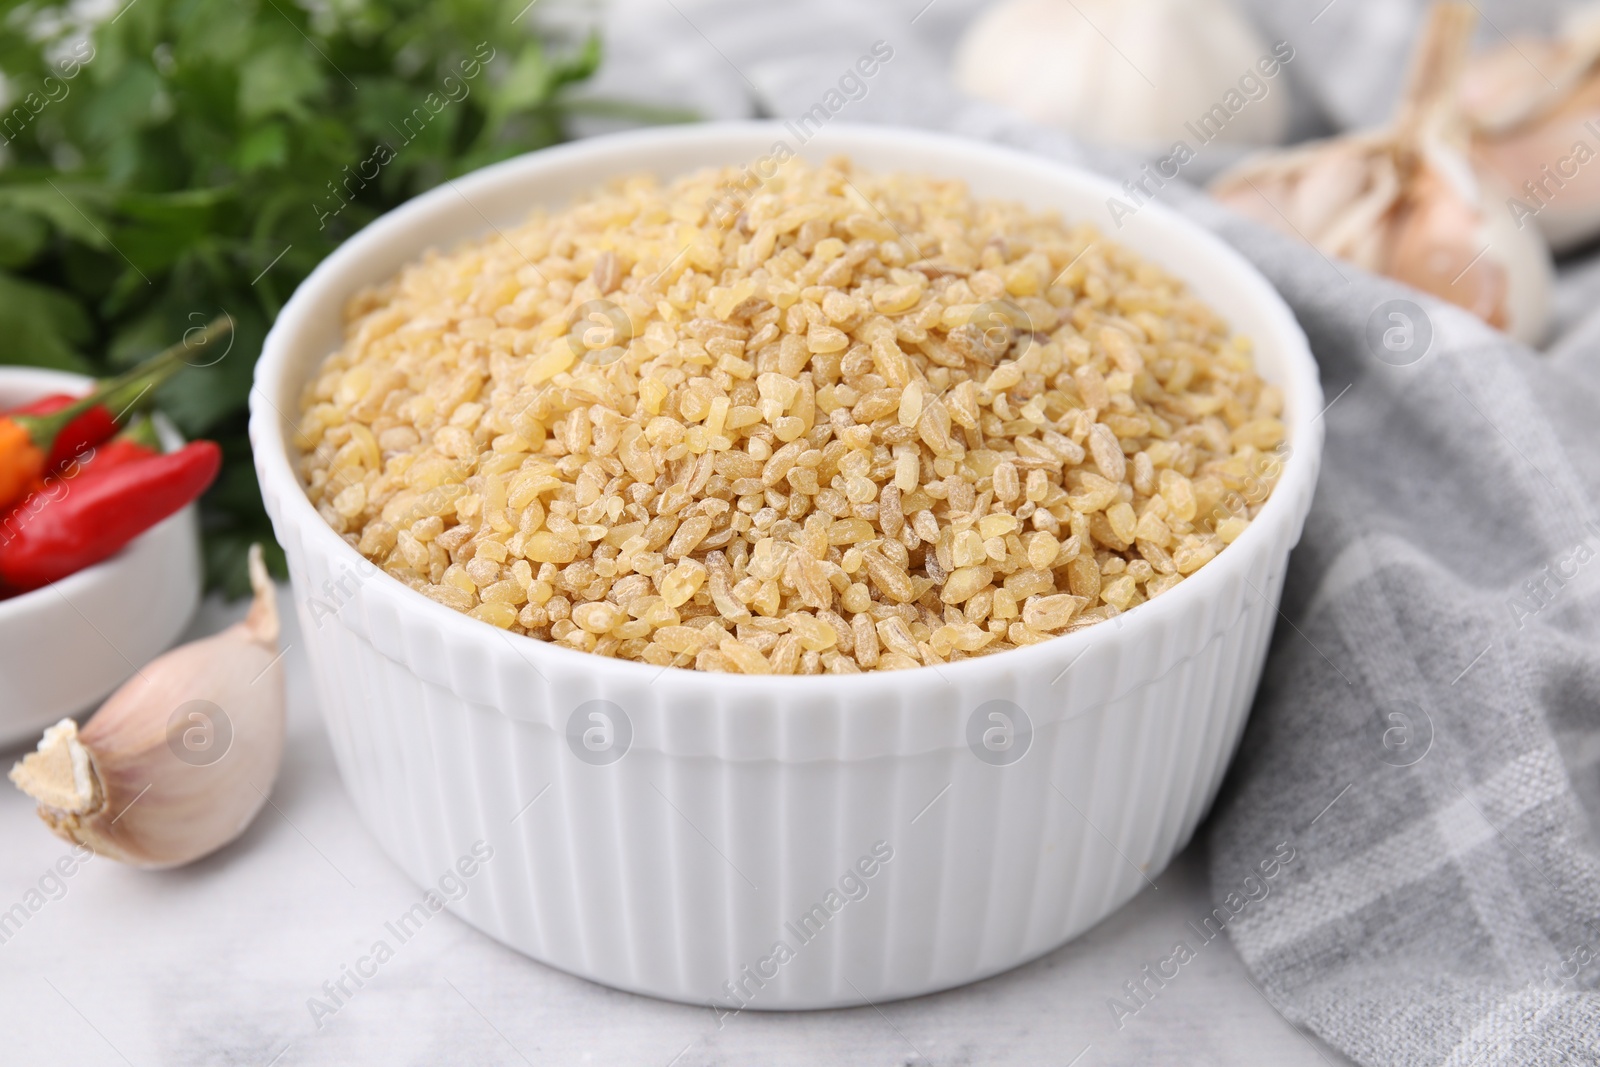 Photo of Raw bulgur in bowl and spices on table, closeup